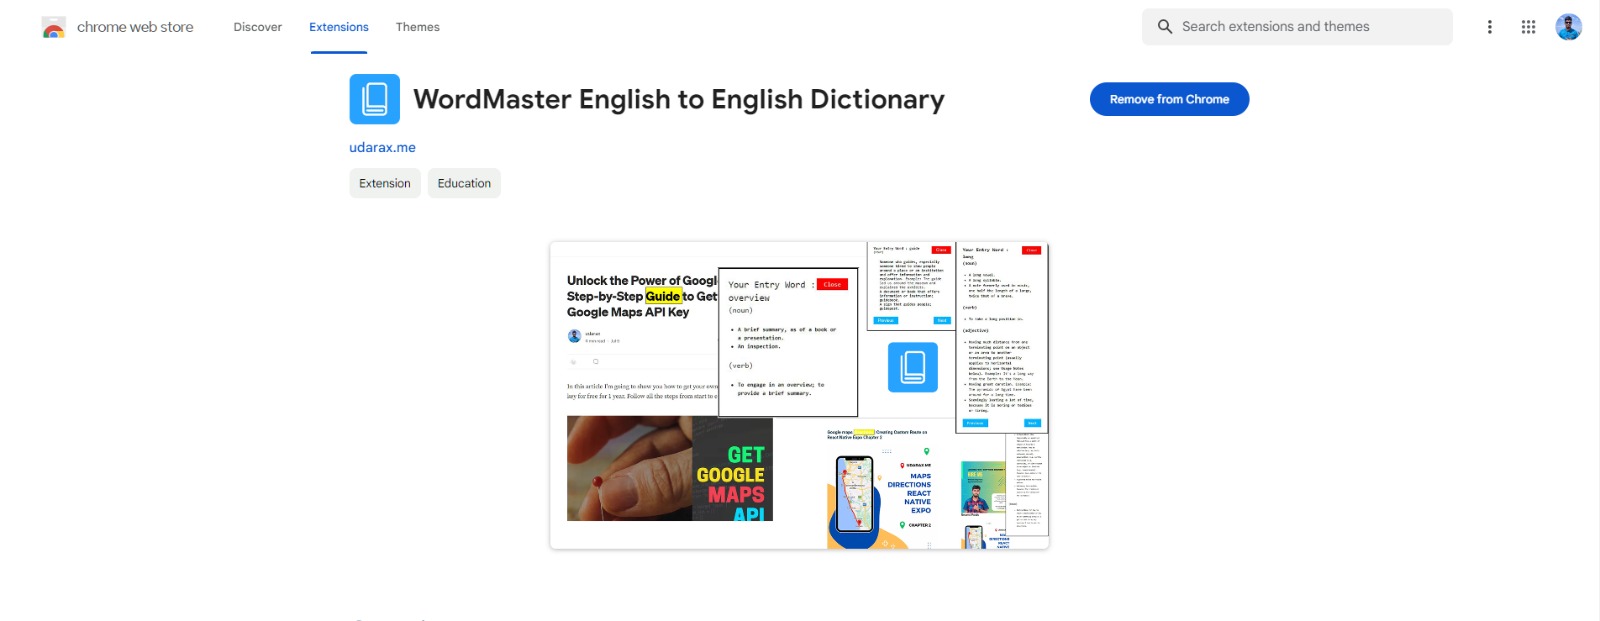 WordMaster English to English Dictionary Chrome Extension